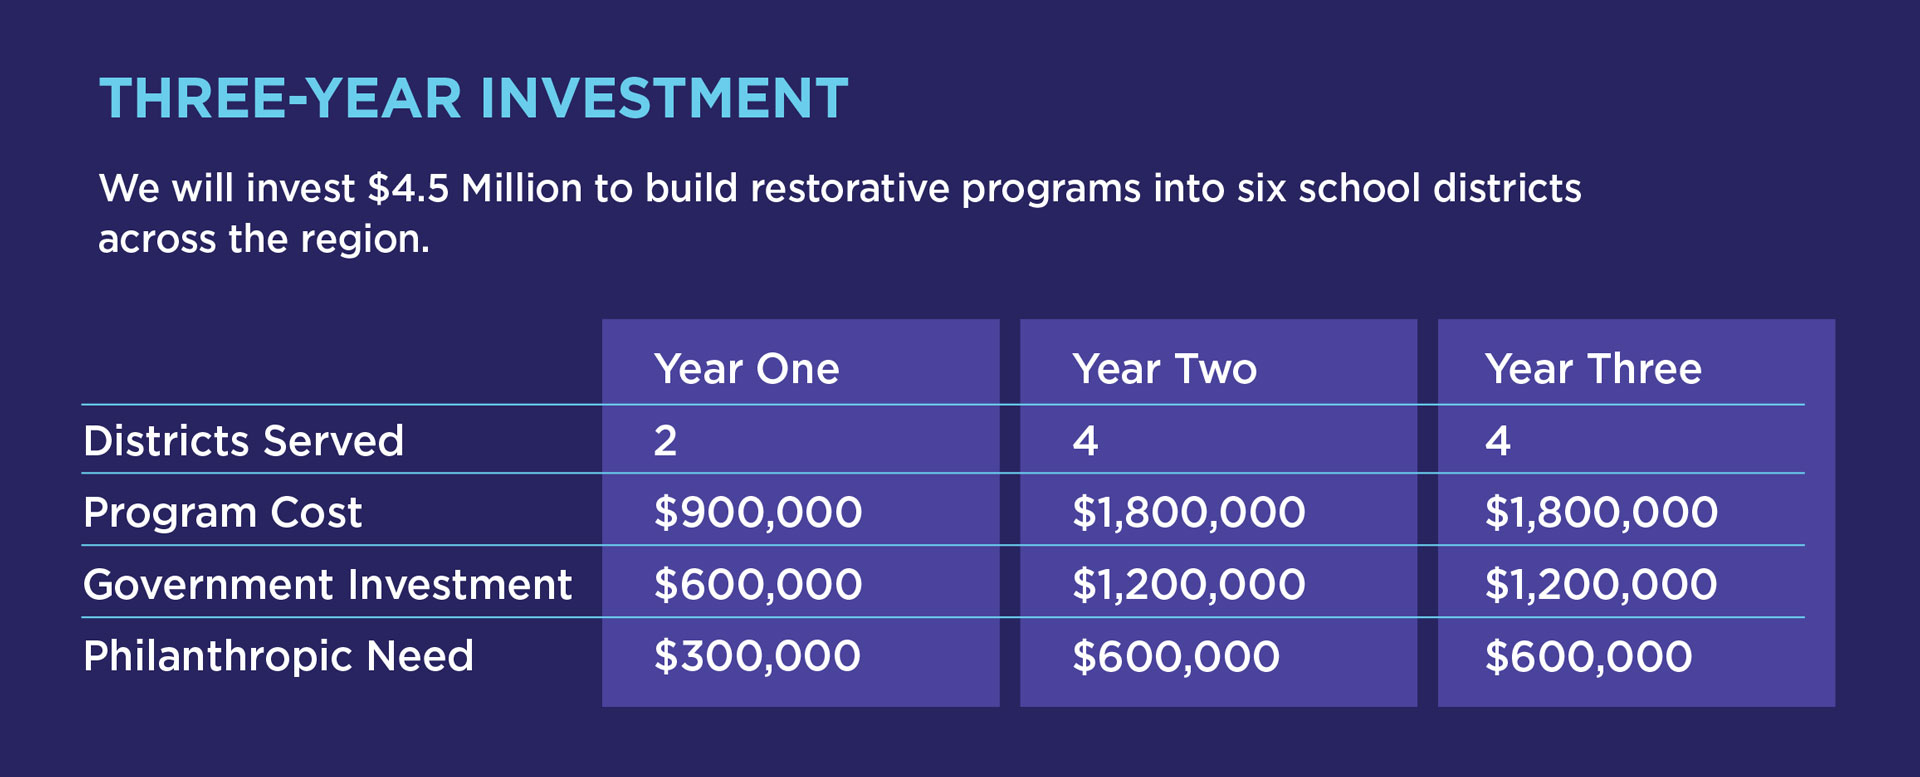 Three-year investment table